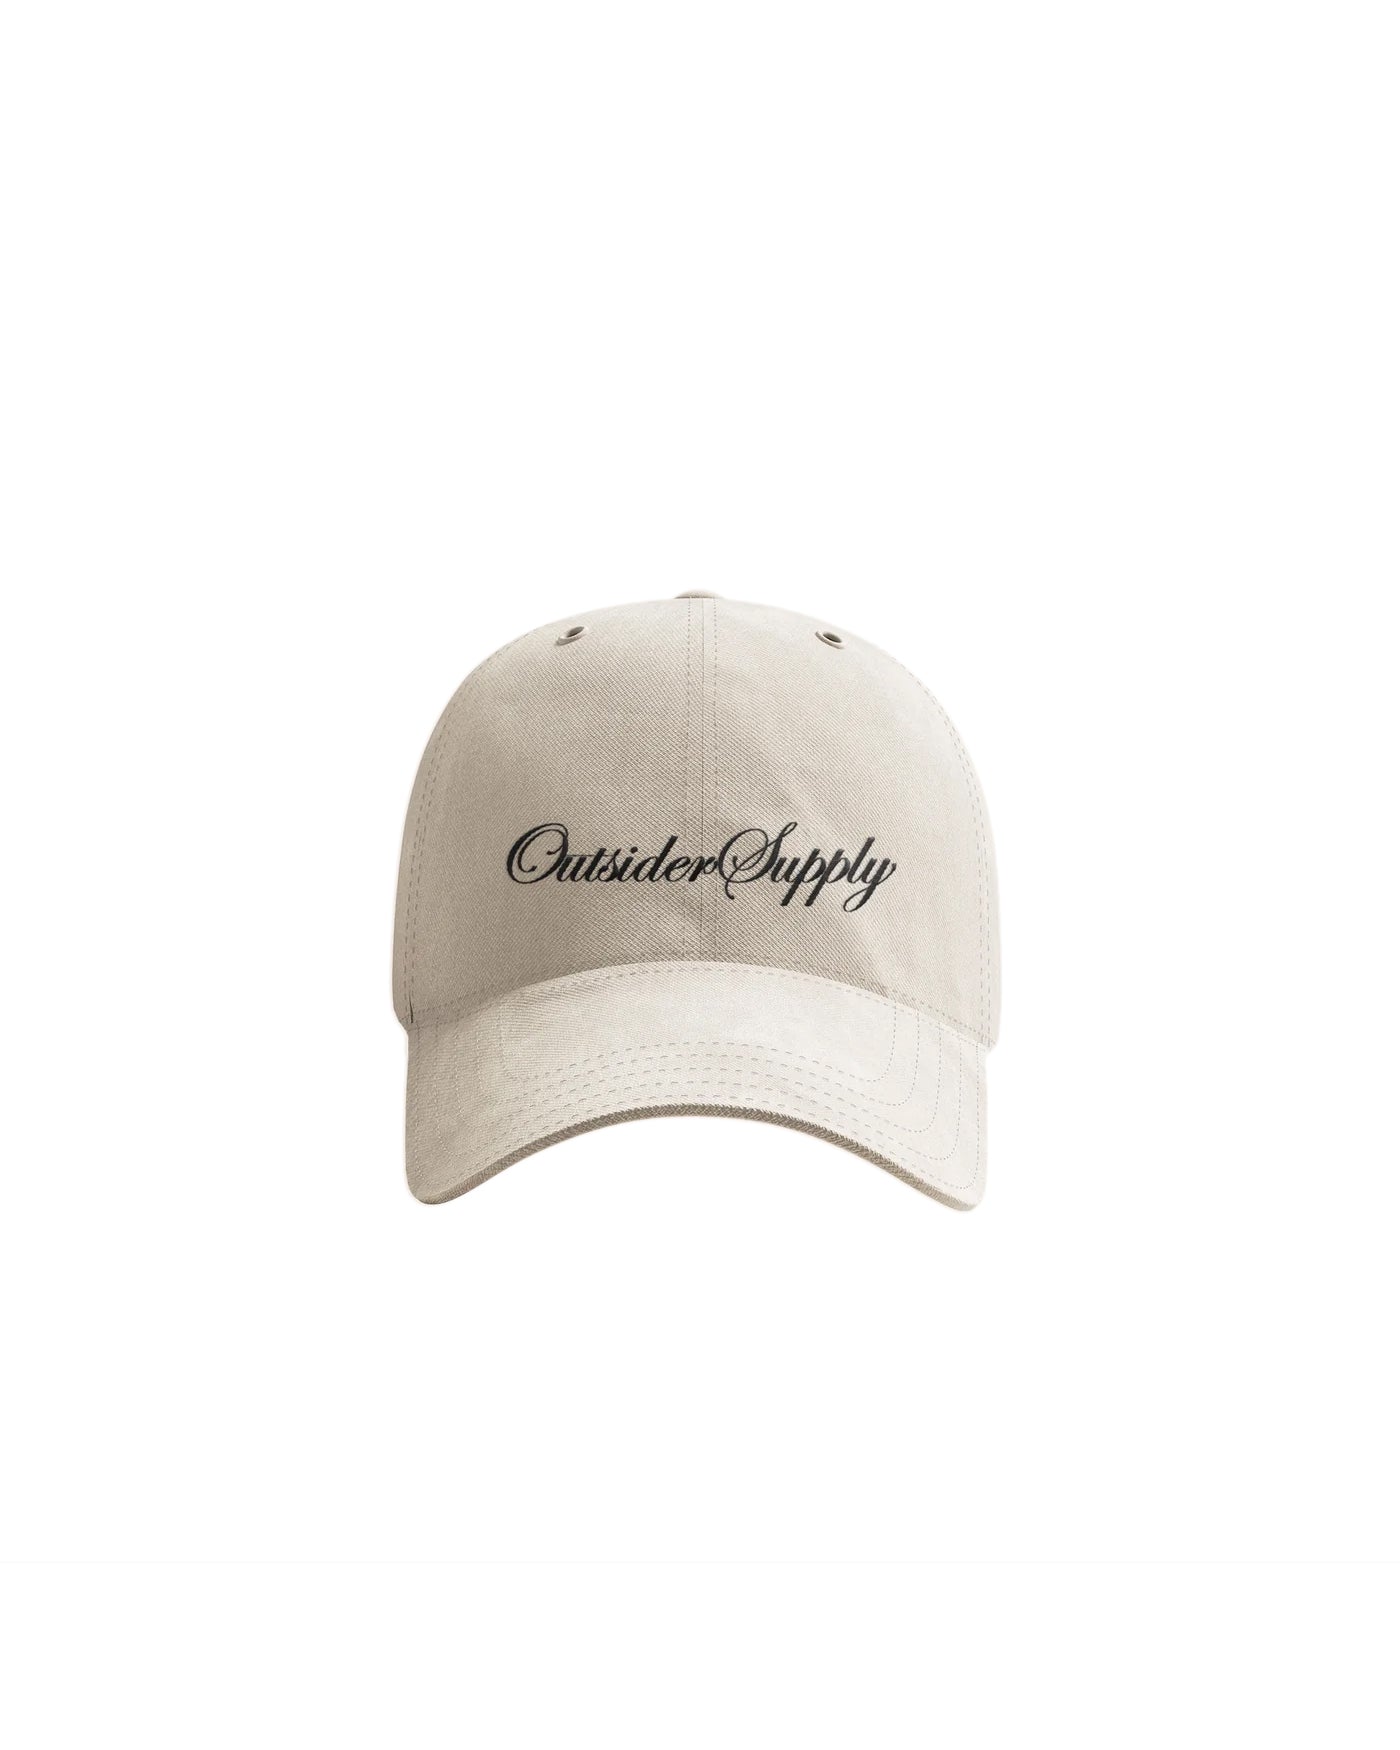 Outsider Supply Classic Dad Hat